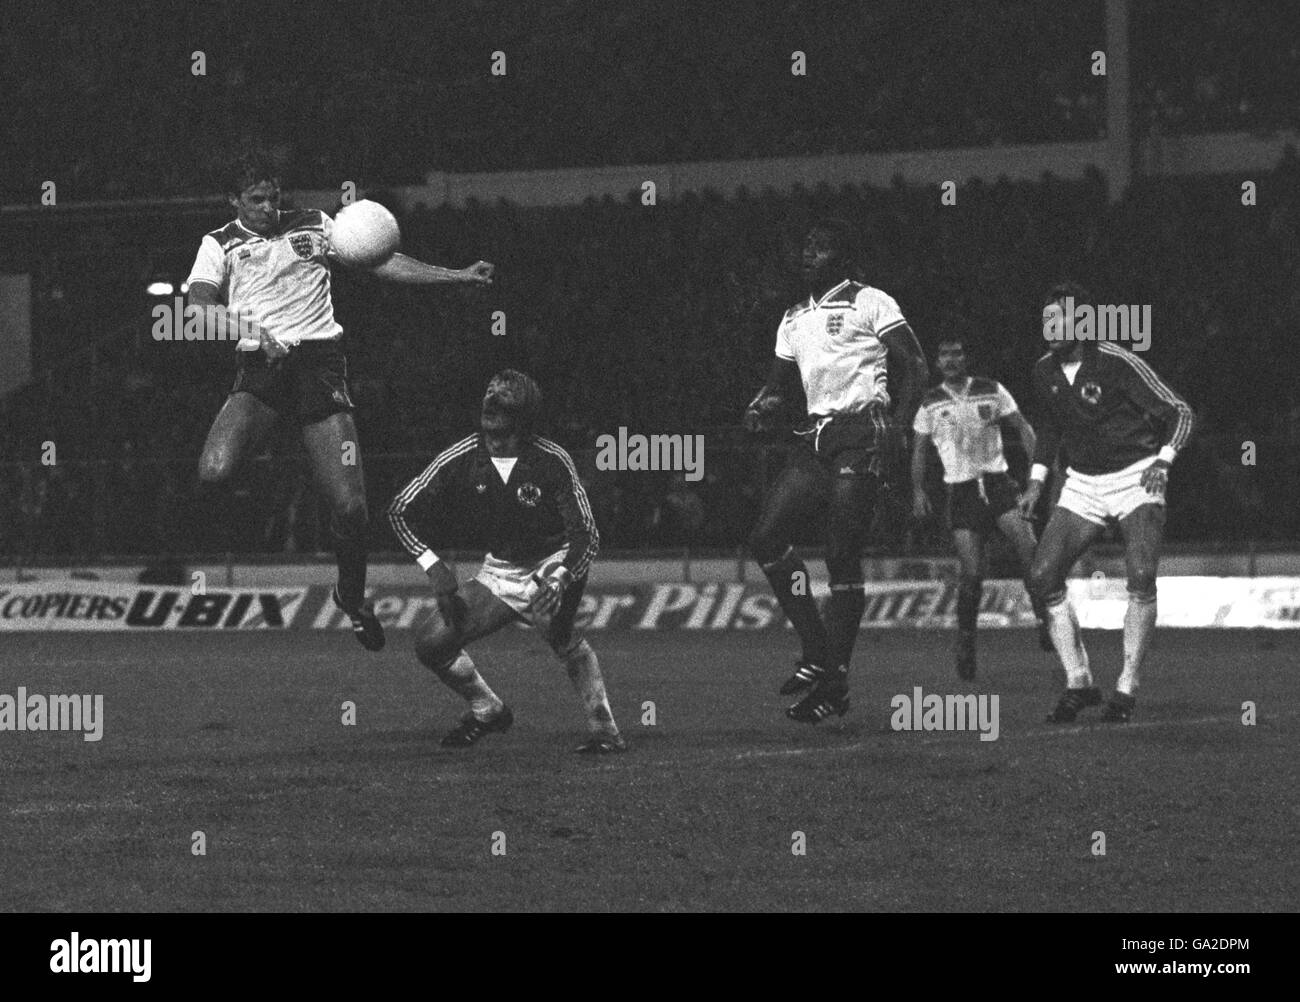 England's new international, Gary Mabbutt (l) powers a header towards the West German goal, saved by goalkeeper Harald Schumacher as England substitute Luther Blissett (c) looks on during the friendly at Wembley. Germany won 2-1. Stock Photo